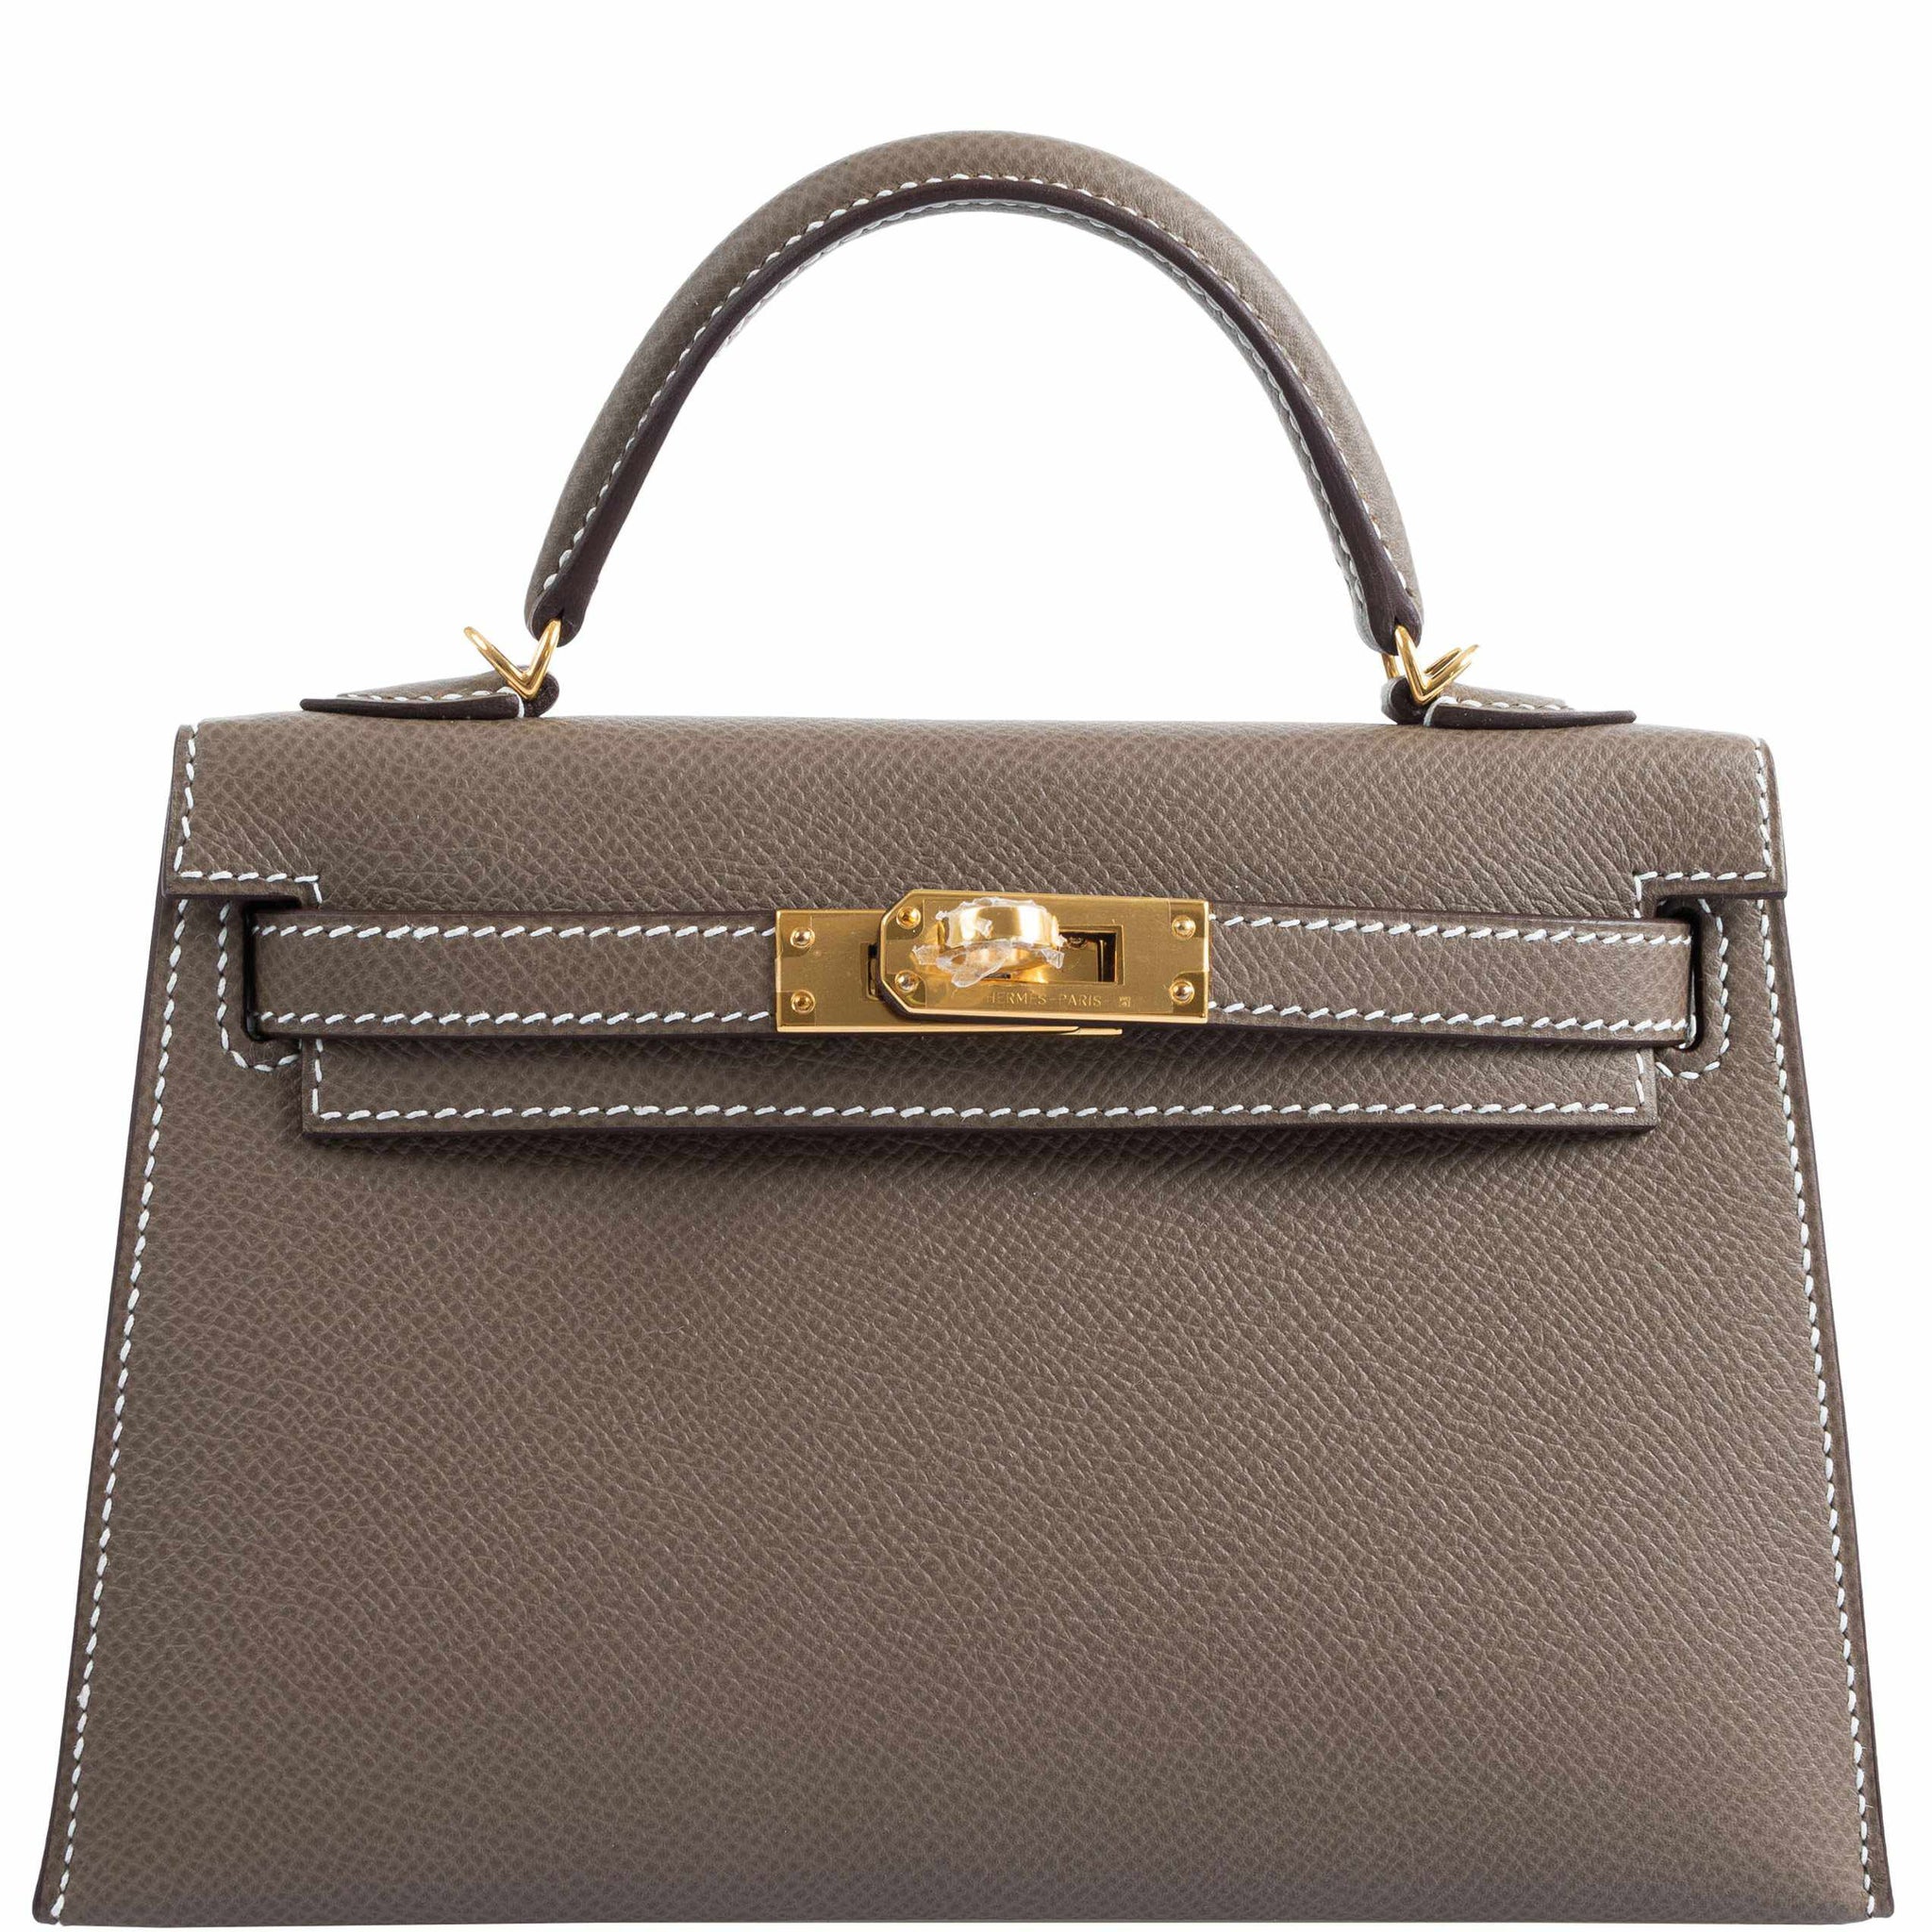 Hermes Mini Kelly 20 Sellier Bag in Black Epsom Leather with Gold Hardware